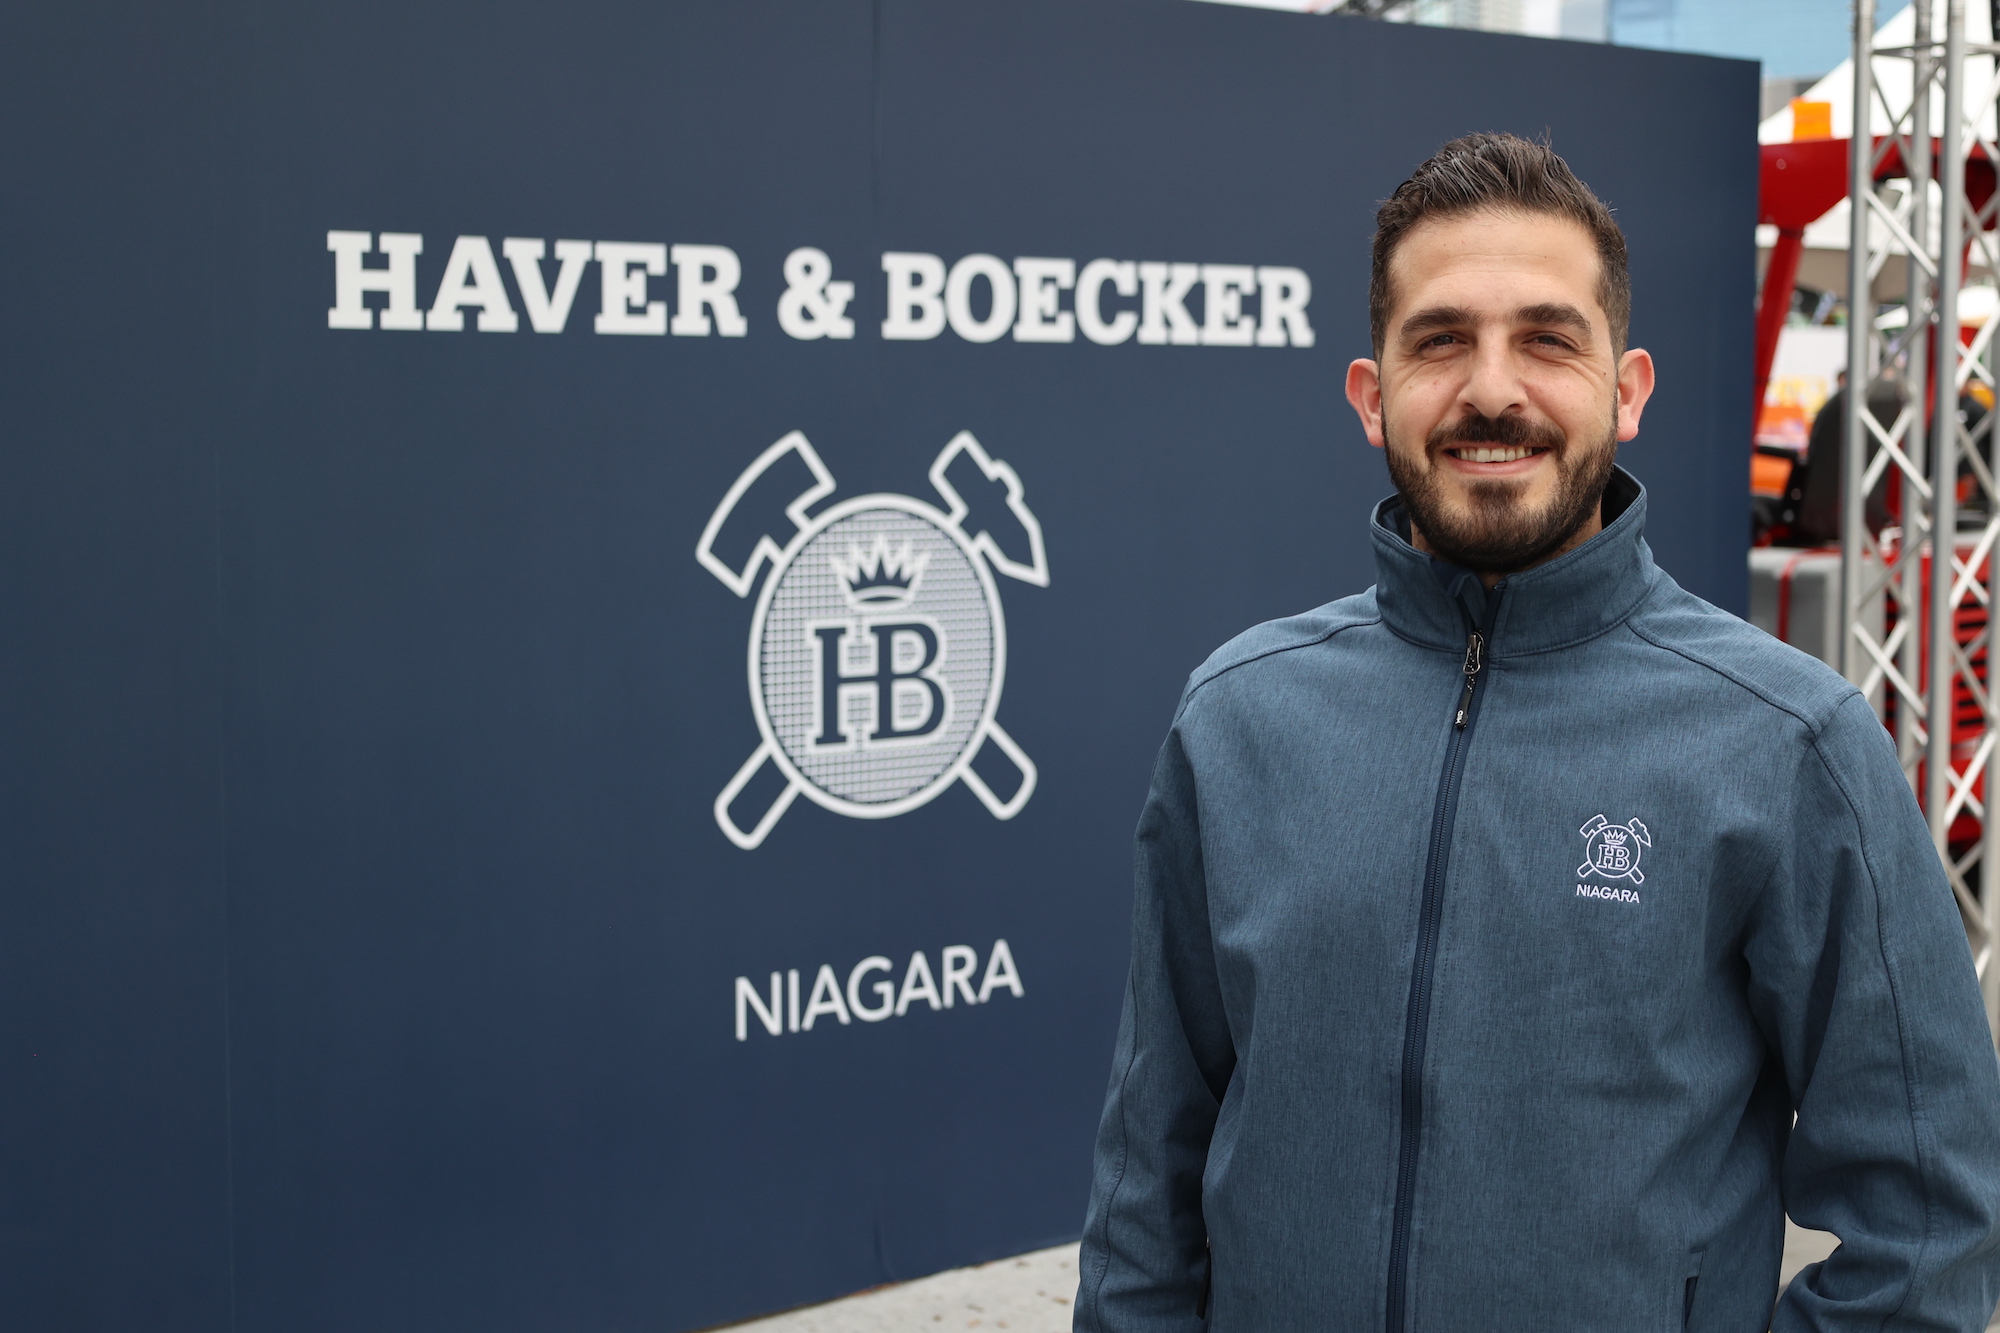 Haver & Boecker Niagara Names New Certified Sales Manager for California